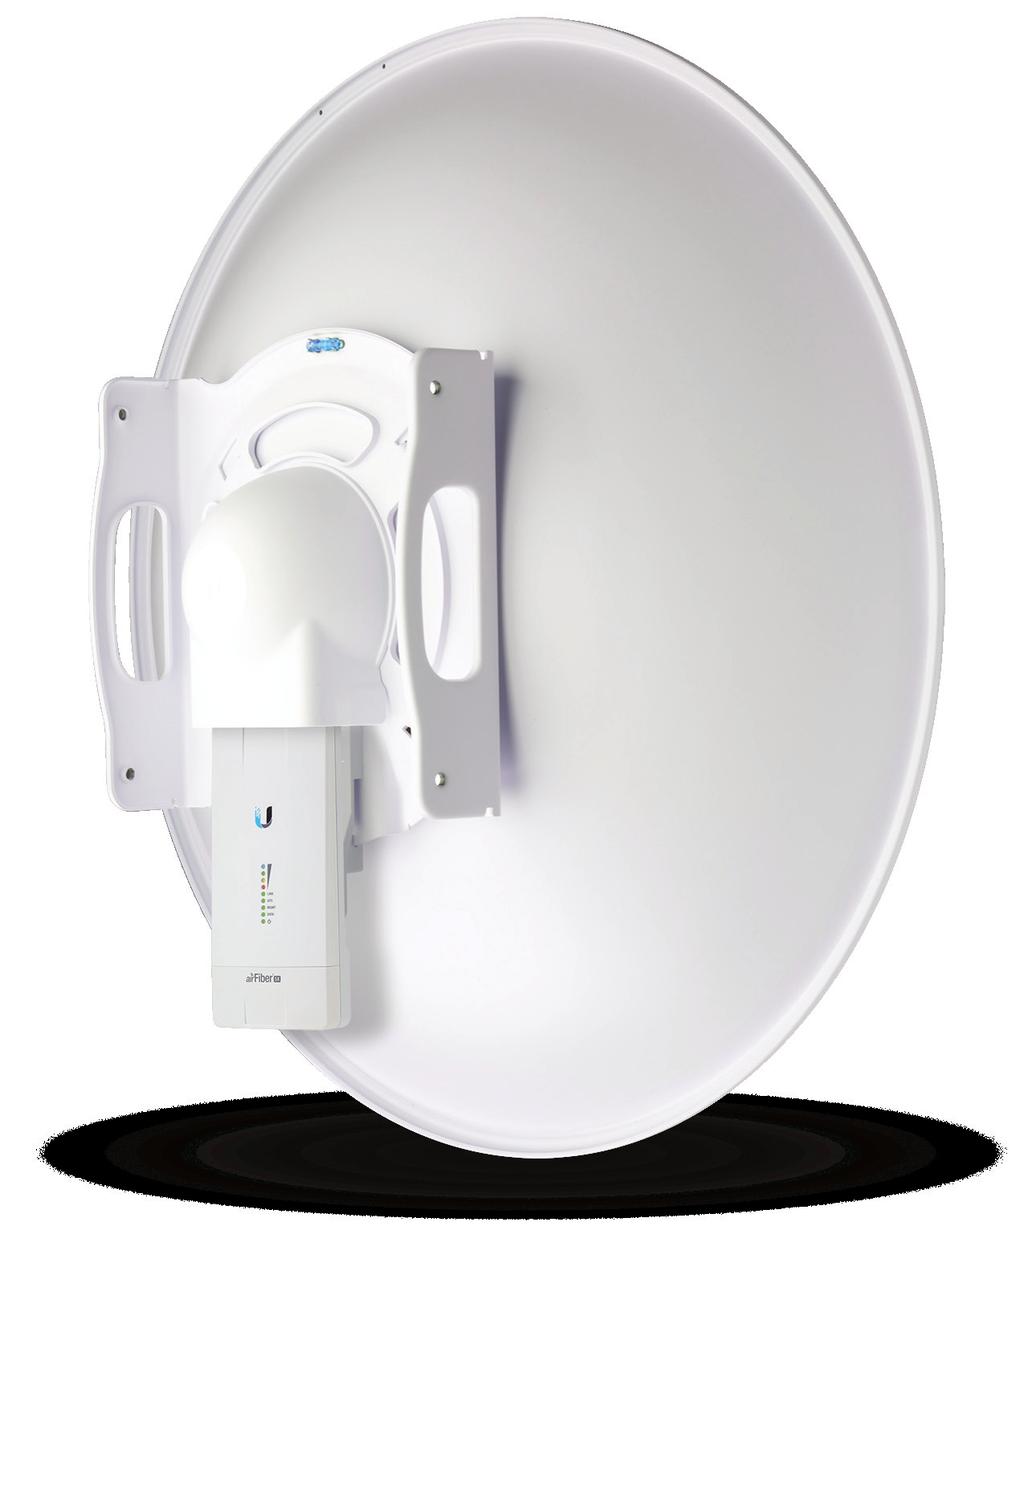 Overview Ubiquiti Networks continues to disrupt the wireless broadband market with revolutionary technology at breakthrough pricing by introducing airfiber X, a modular airfiber radio system